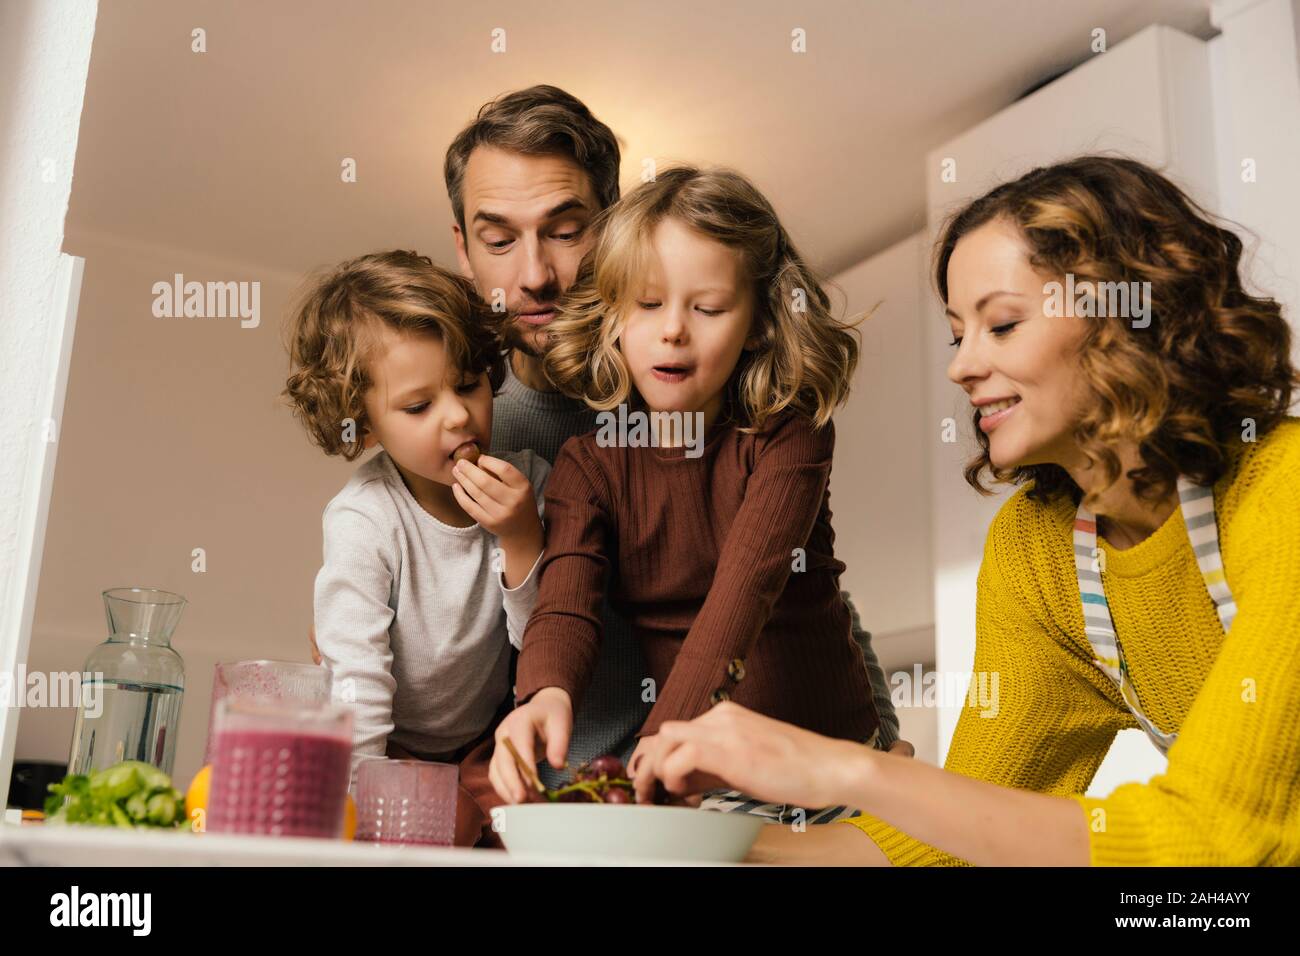 Family eating grapes in kitchen Stock Photo